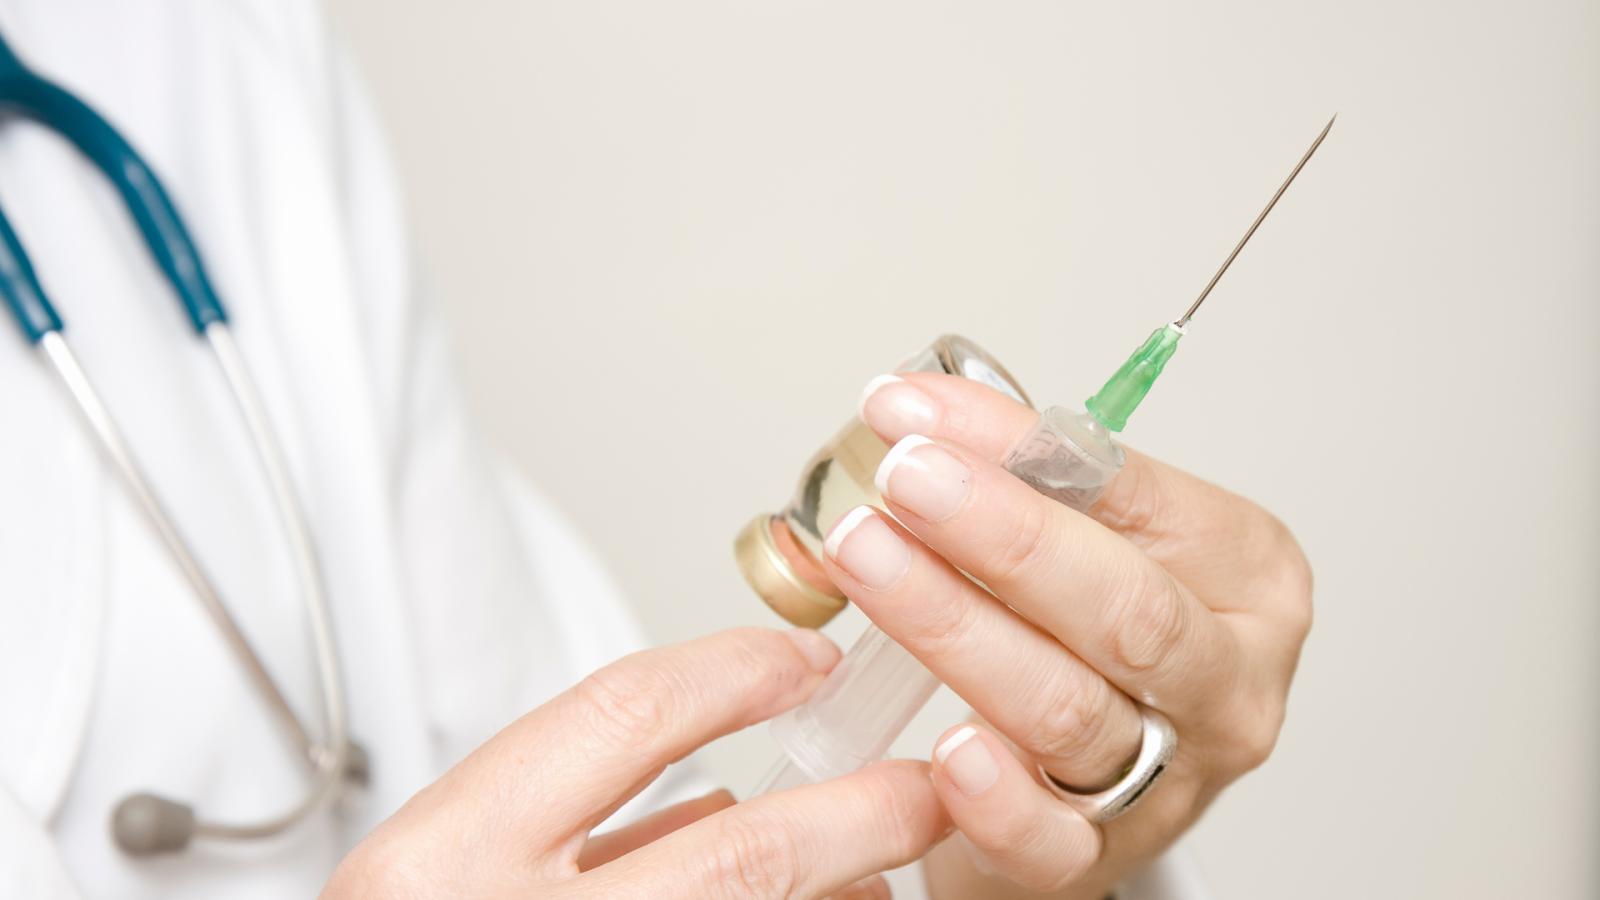 A doctor in a white coat is holding a syringe with a needle and a vial with a green liquid.